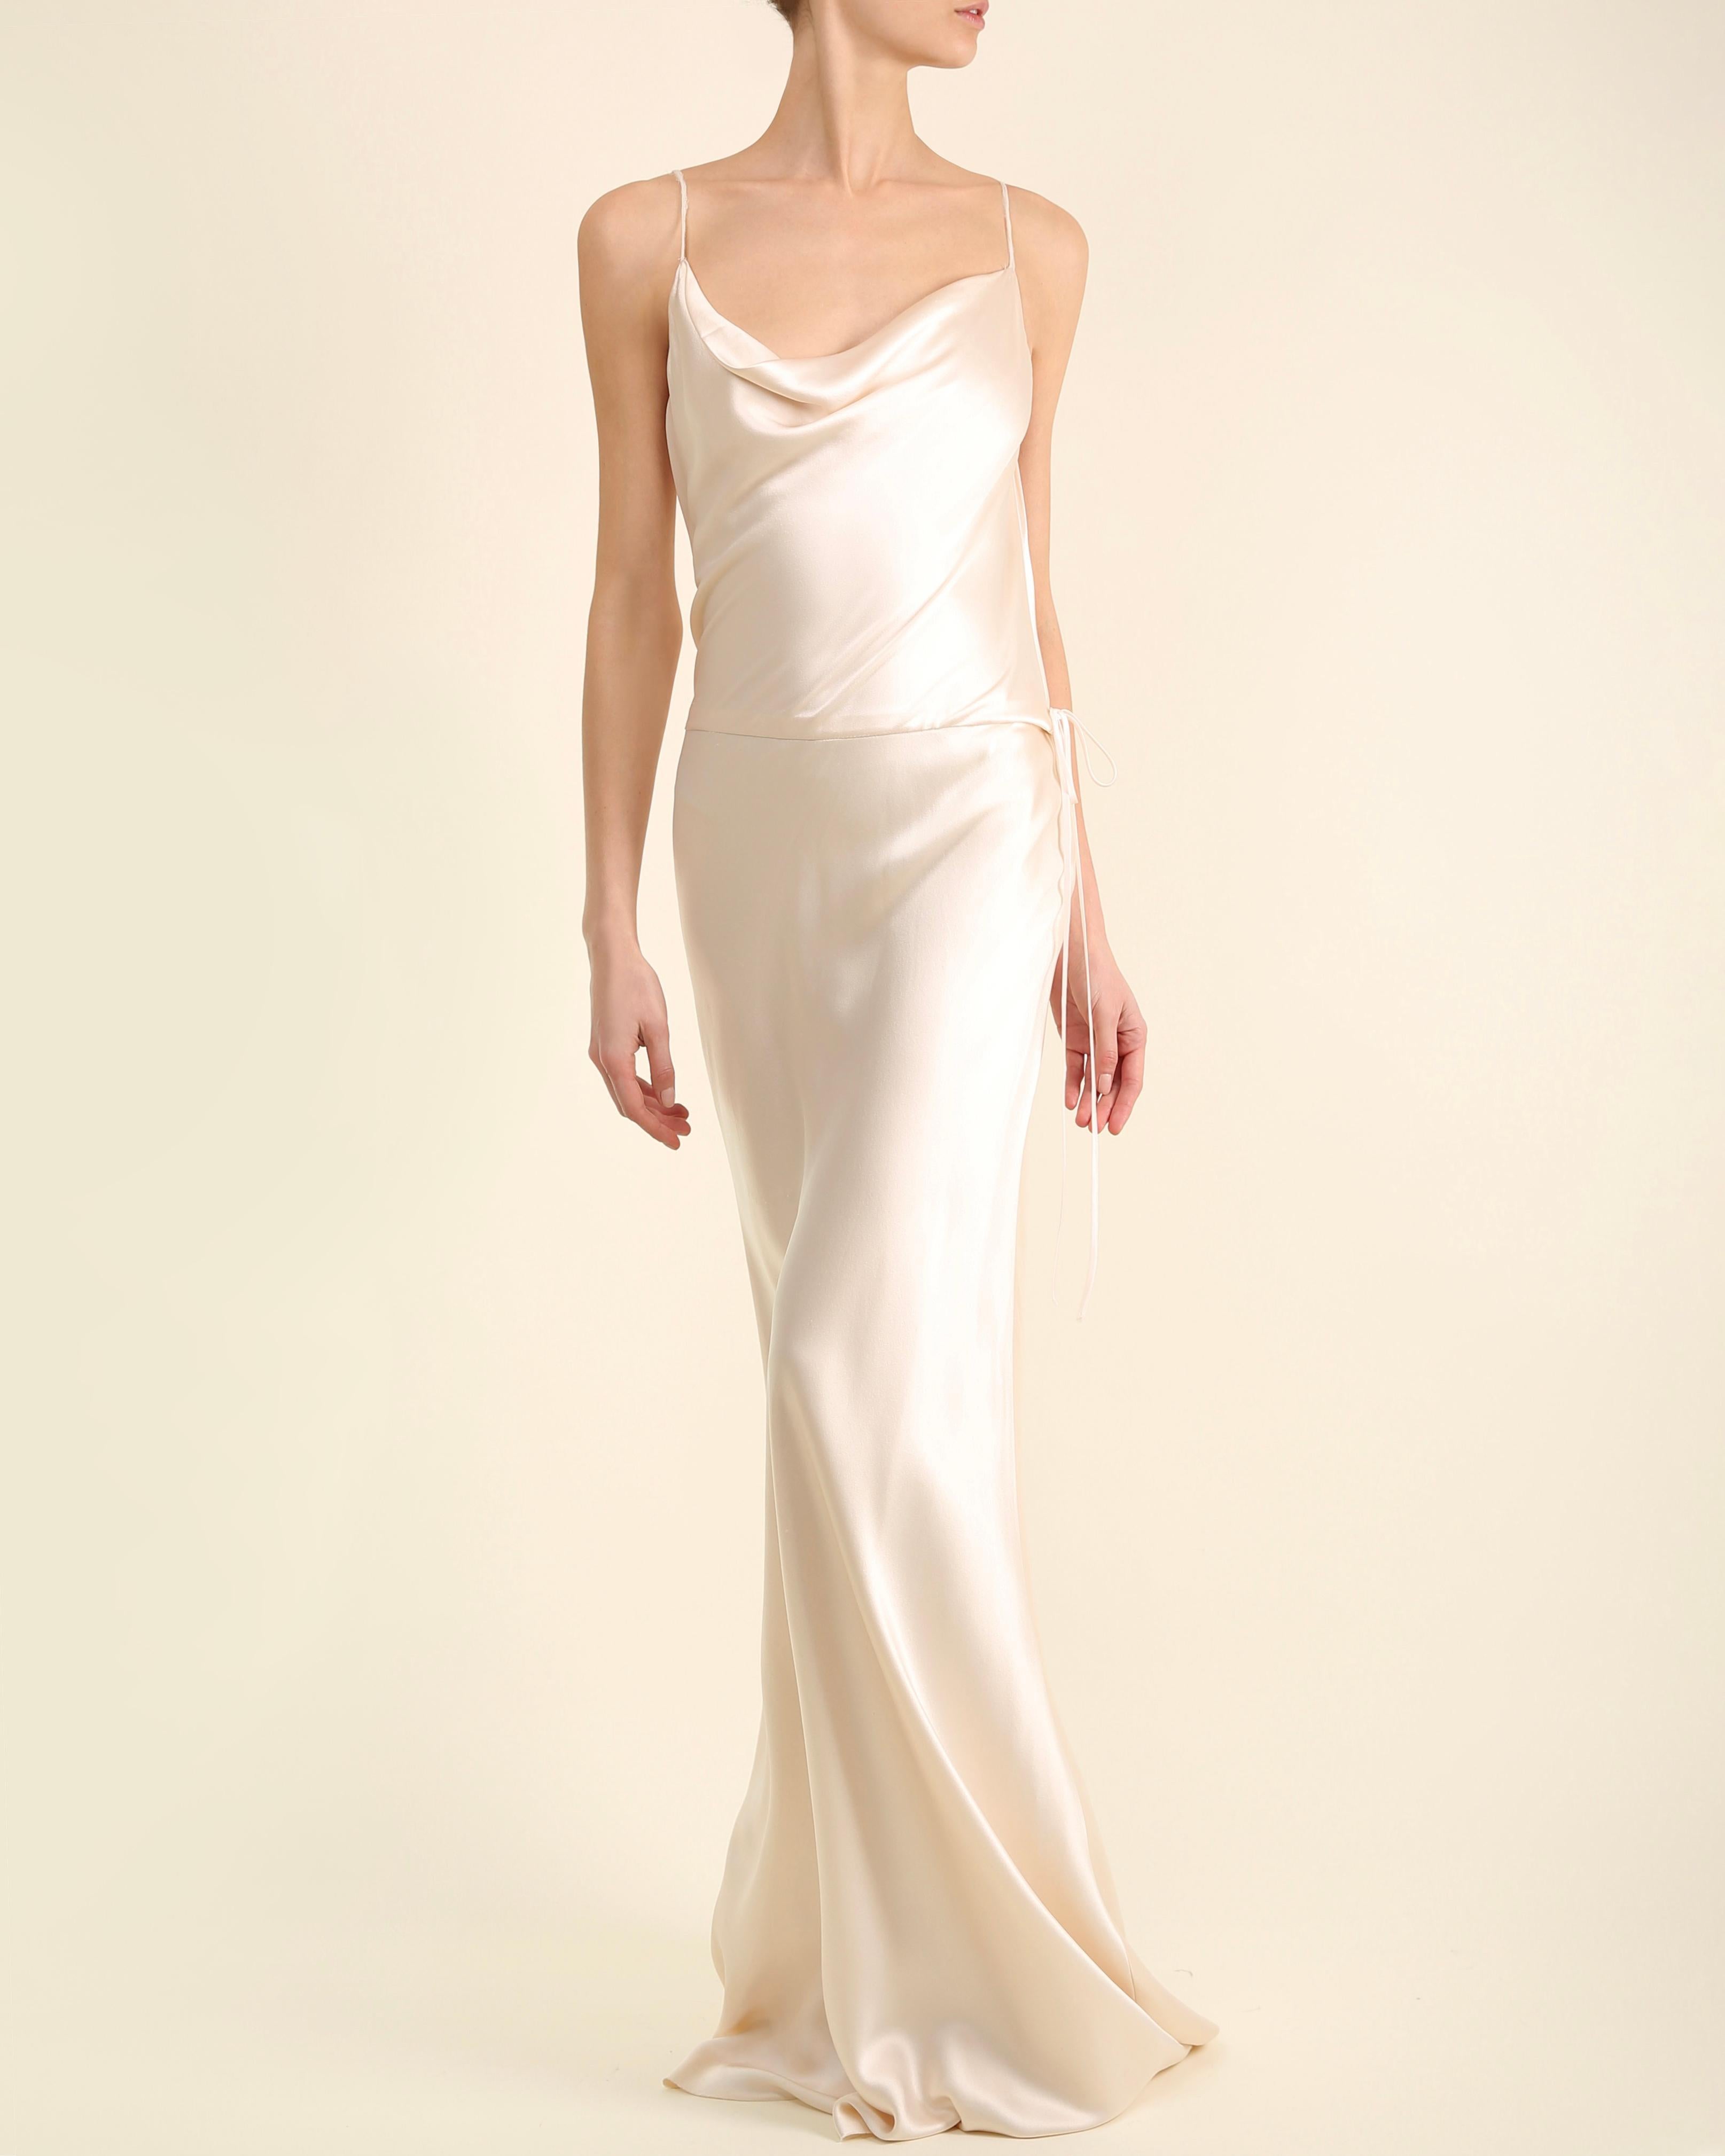 LOVE LALI Vintage

Monique L'huillier
This is an absolutely beautiful floor length silk gown in ivory, that would be perfect for an evening event or as a very simple and elegant wedding gown
The silk is wonderfully soft and fluid, adhering to every